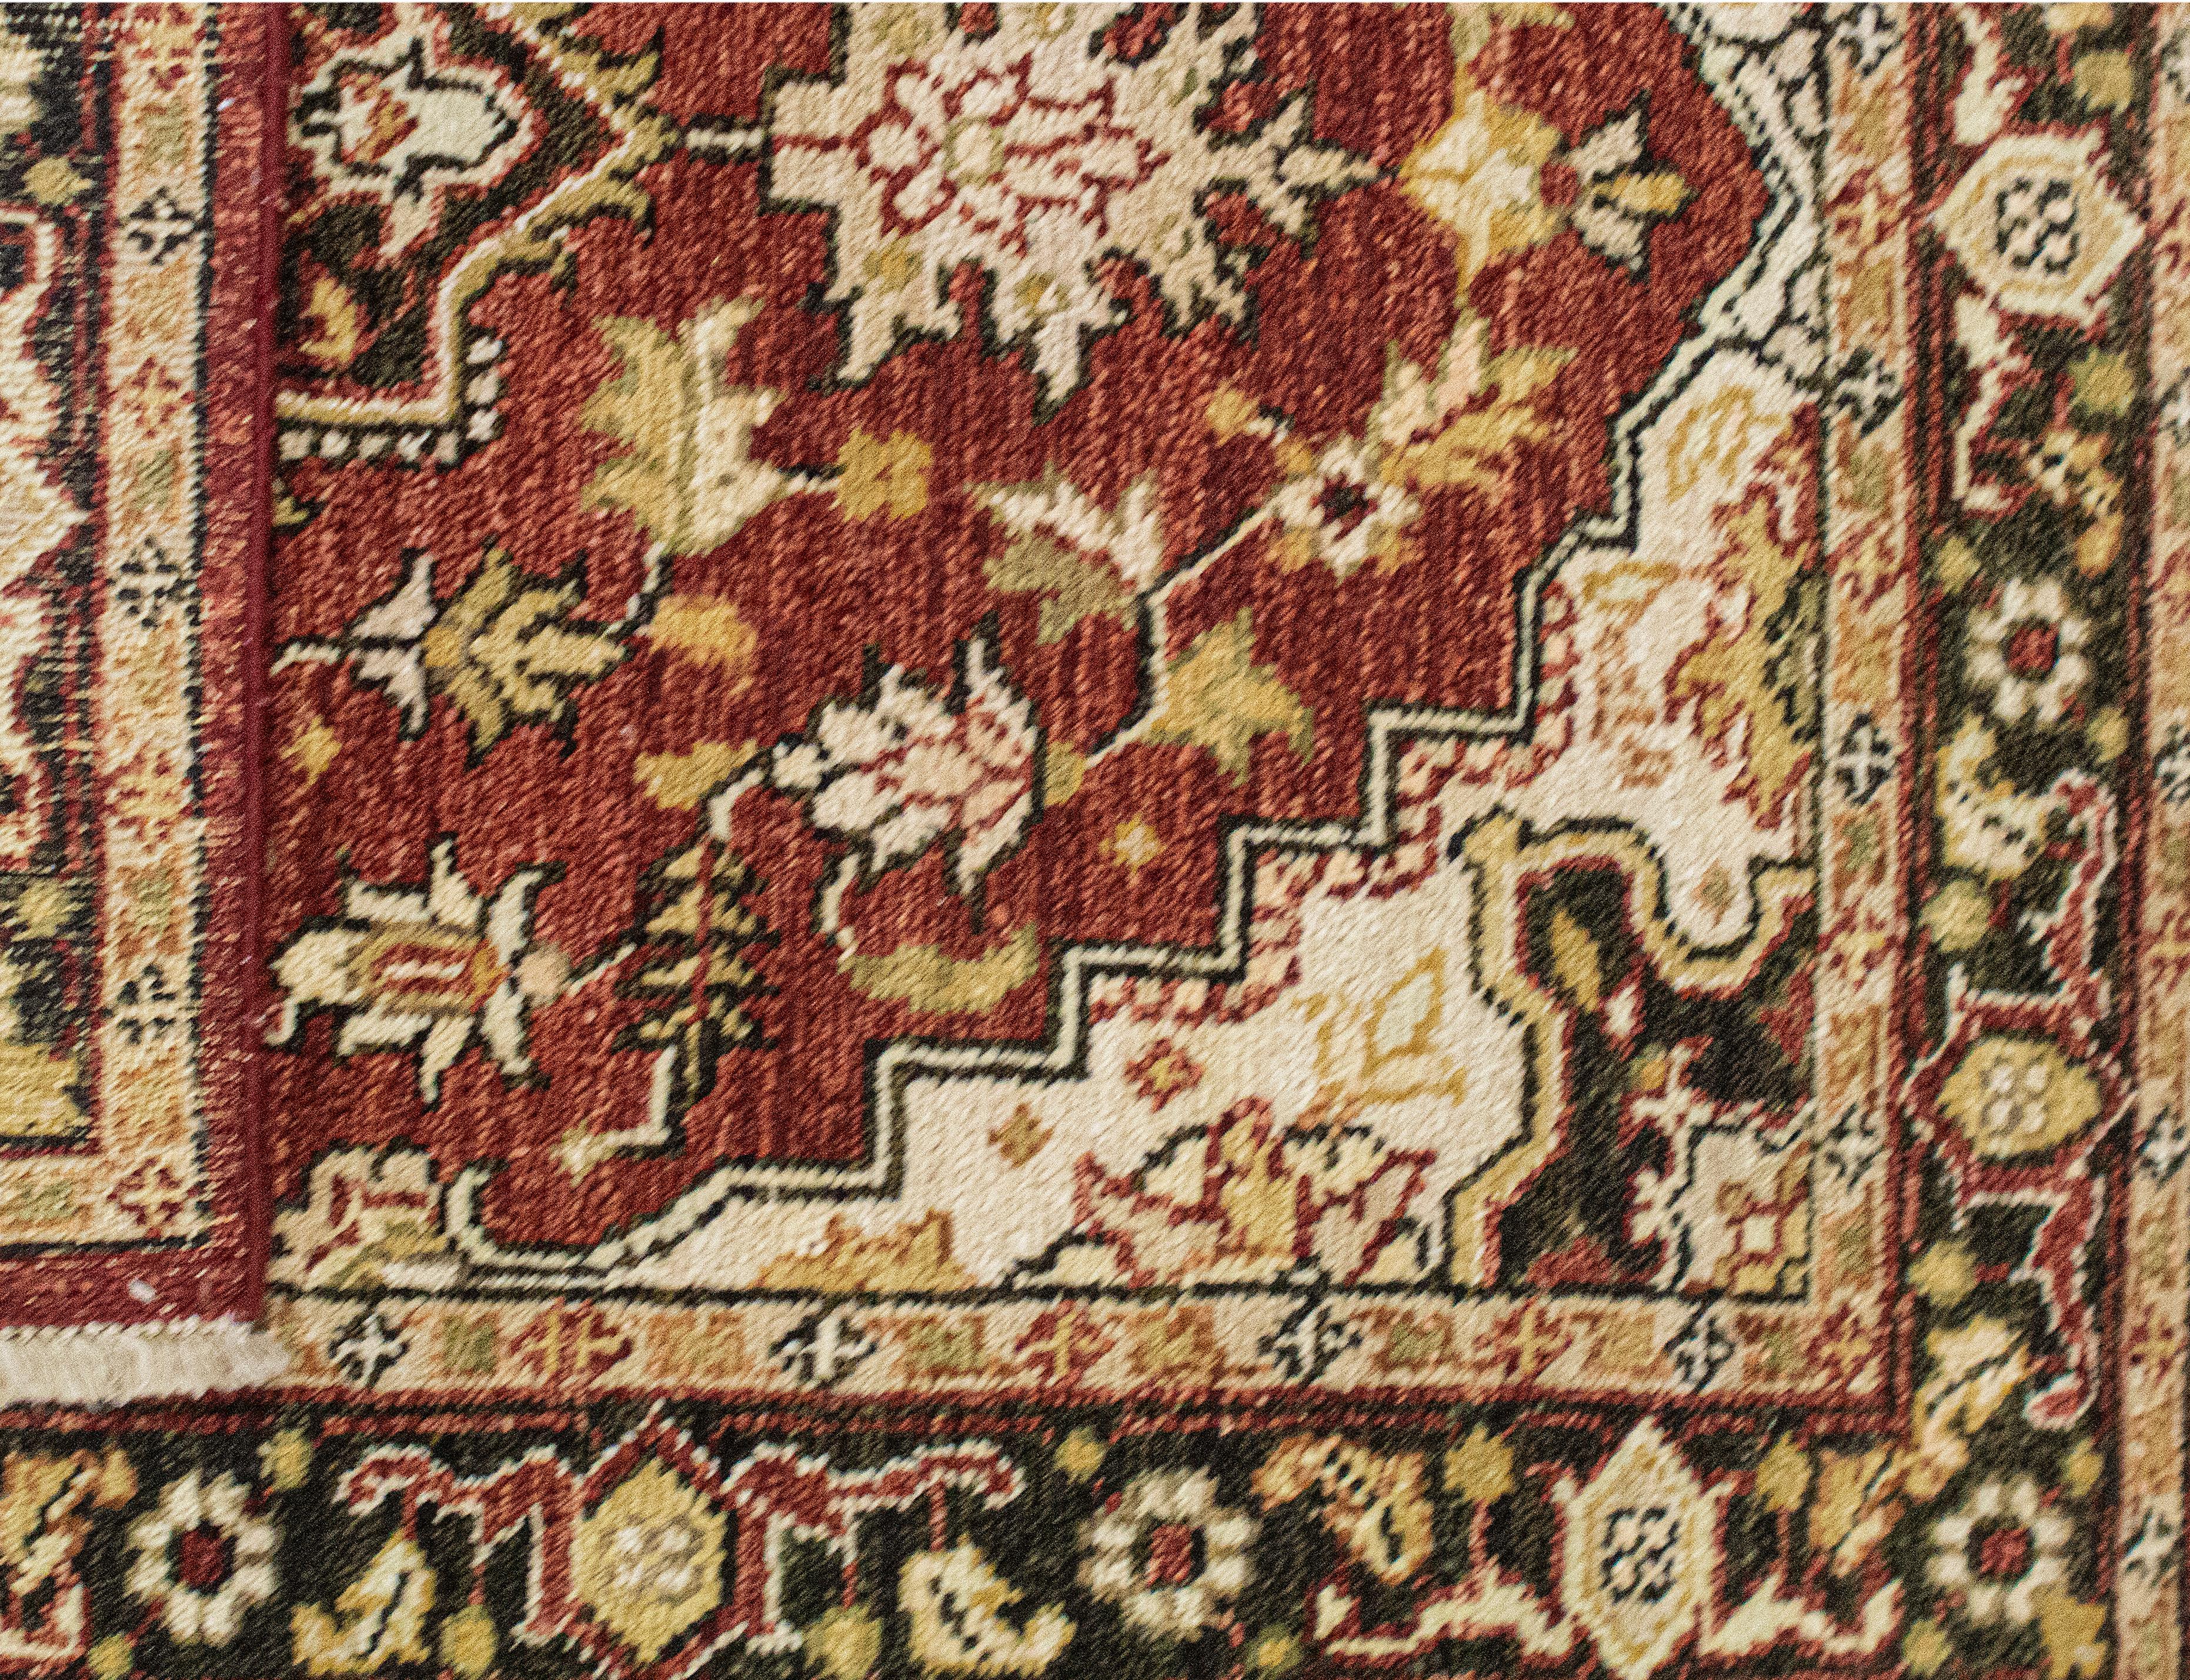 This collection recreates the Classic oriental designs and brings them to the market place, coupling stringent quality standards with the use of only the finest materials, ensuring these rugs will stand up to the rigors of modern life. Measures: